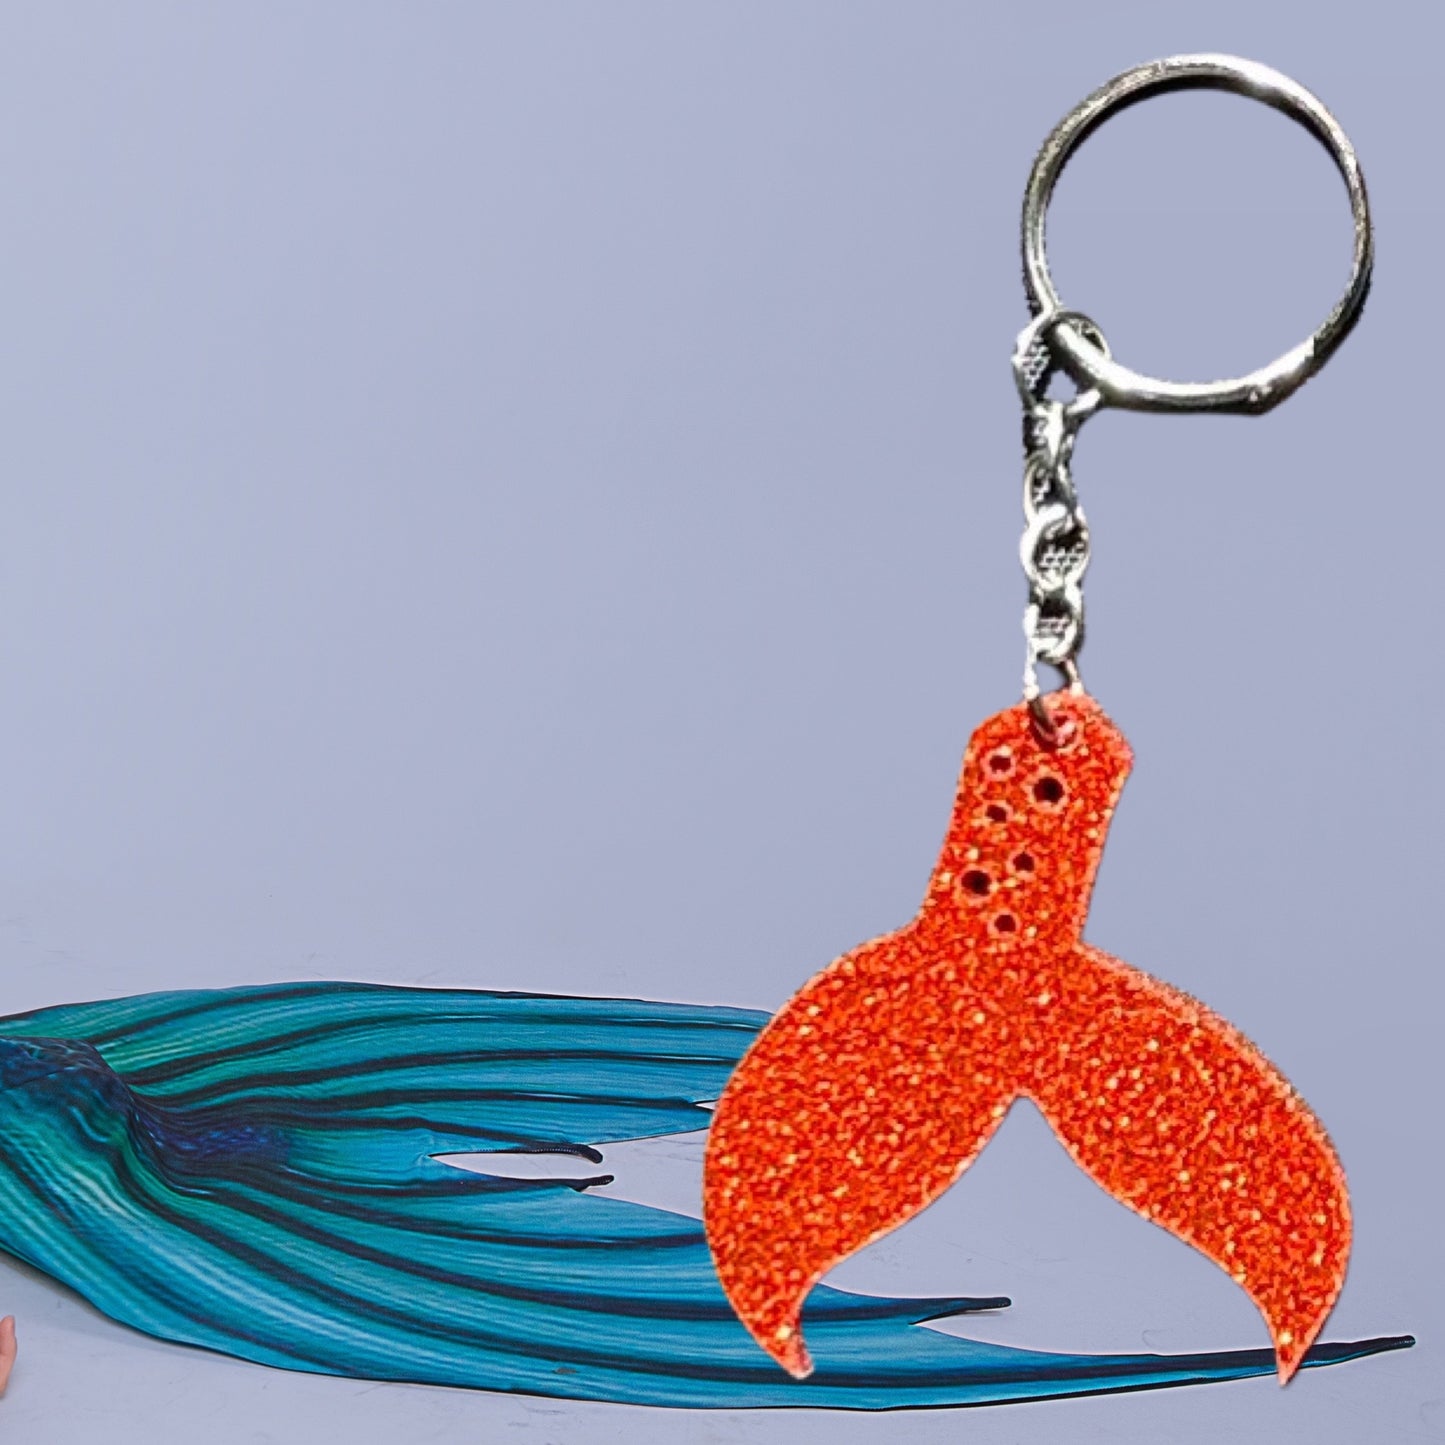 Bubble Fin Mermaid Tail Laser Cut Lightweight Acrylic Keychains- Multiple Colors